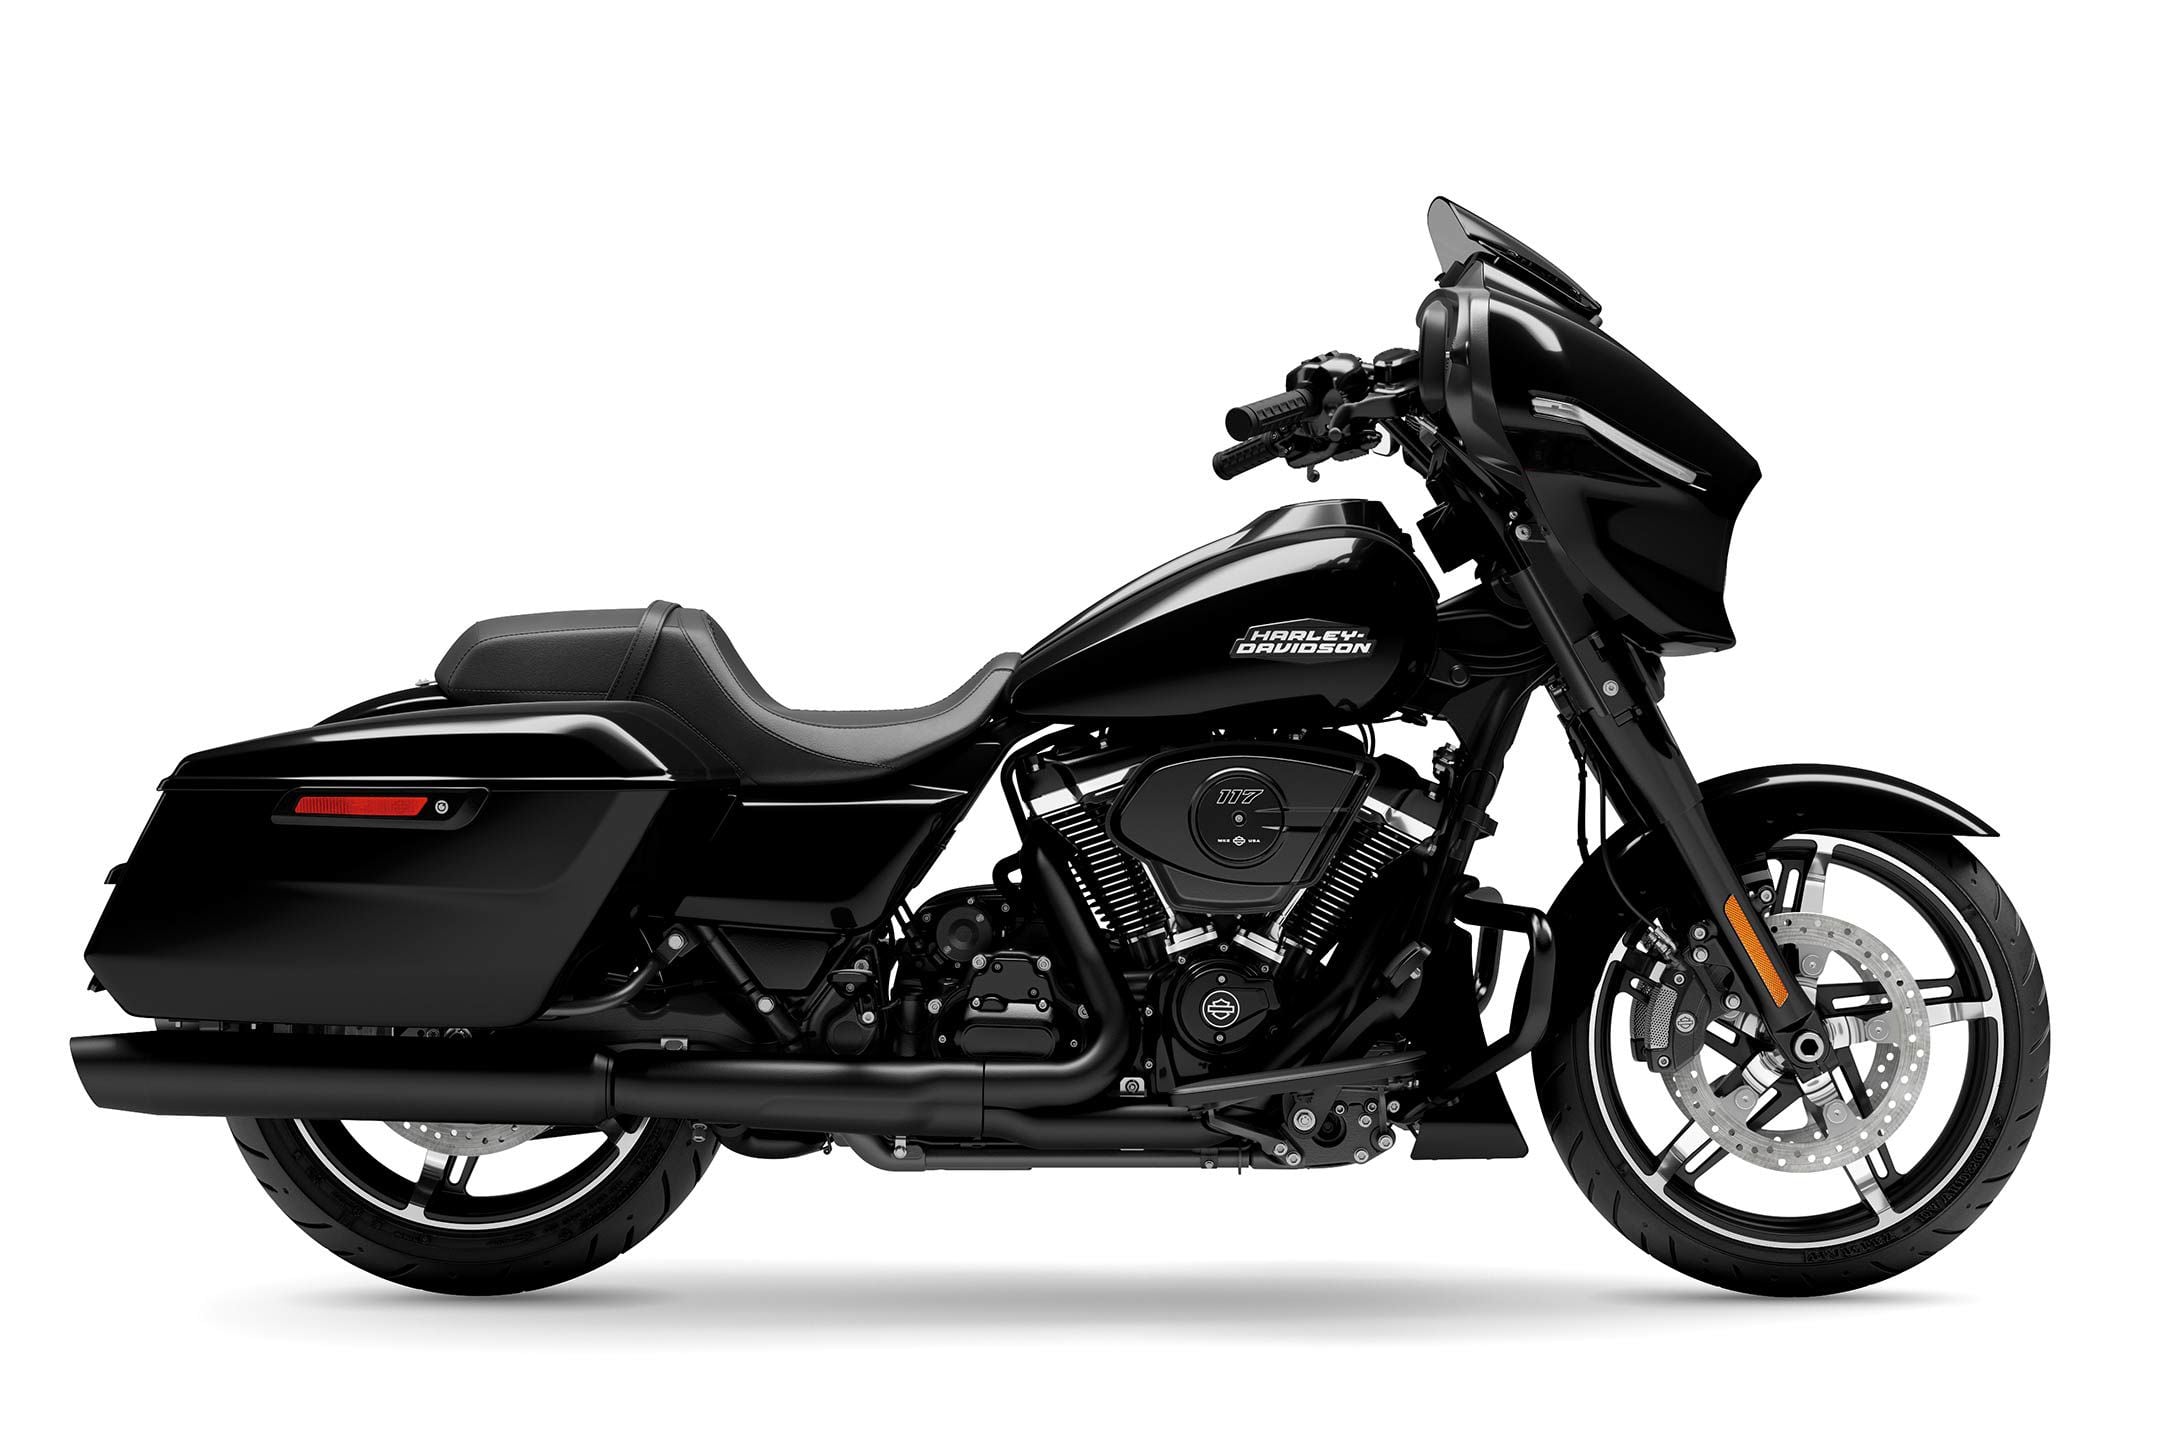 Both models use an updated version of the Milwaukee-Eight 117.